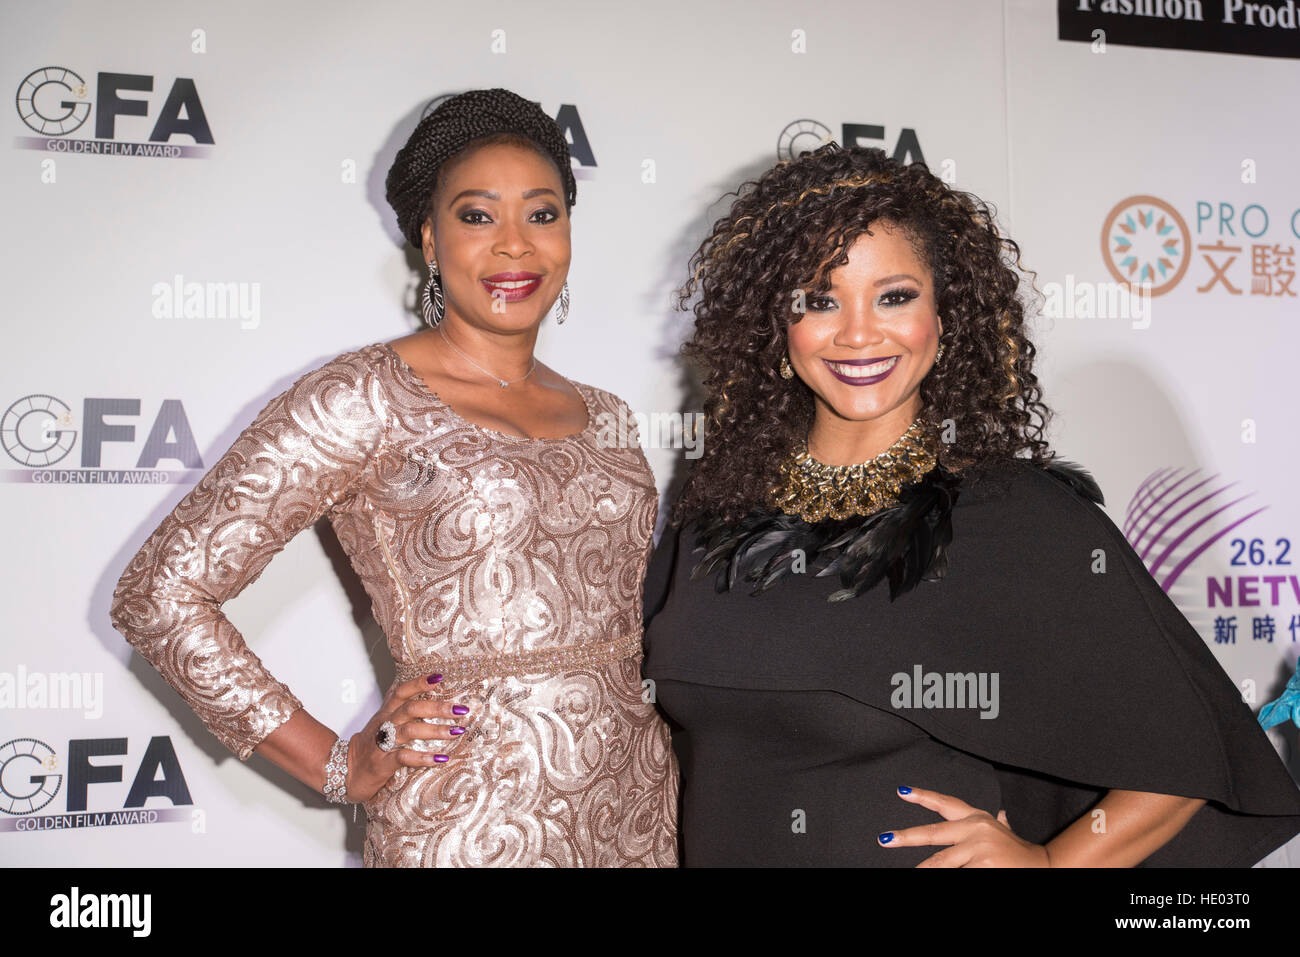 Los Angeles, USA. 14th Dec, 2016. Monalisa OkoJie, Shauntay Hinton attends at USHIFF Golden Film Awards Ceremony December 14, 2016 in Holllywood, California. © The Photo Access/Alamy Live News Stock Photo